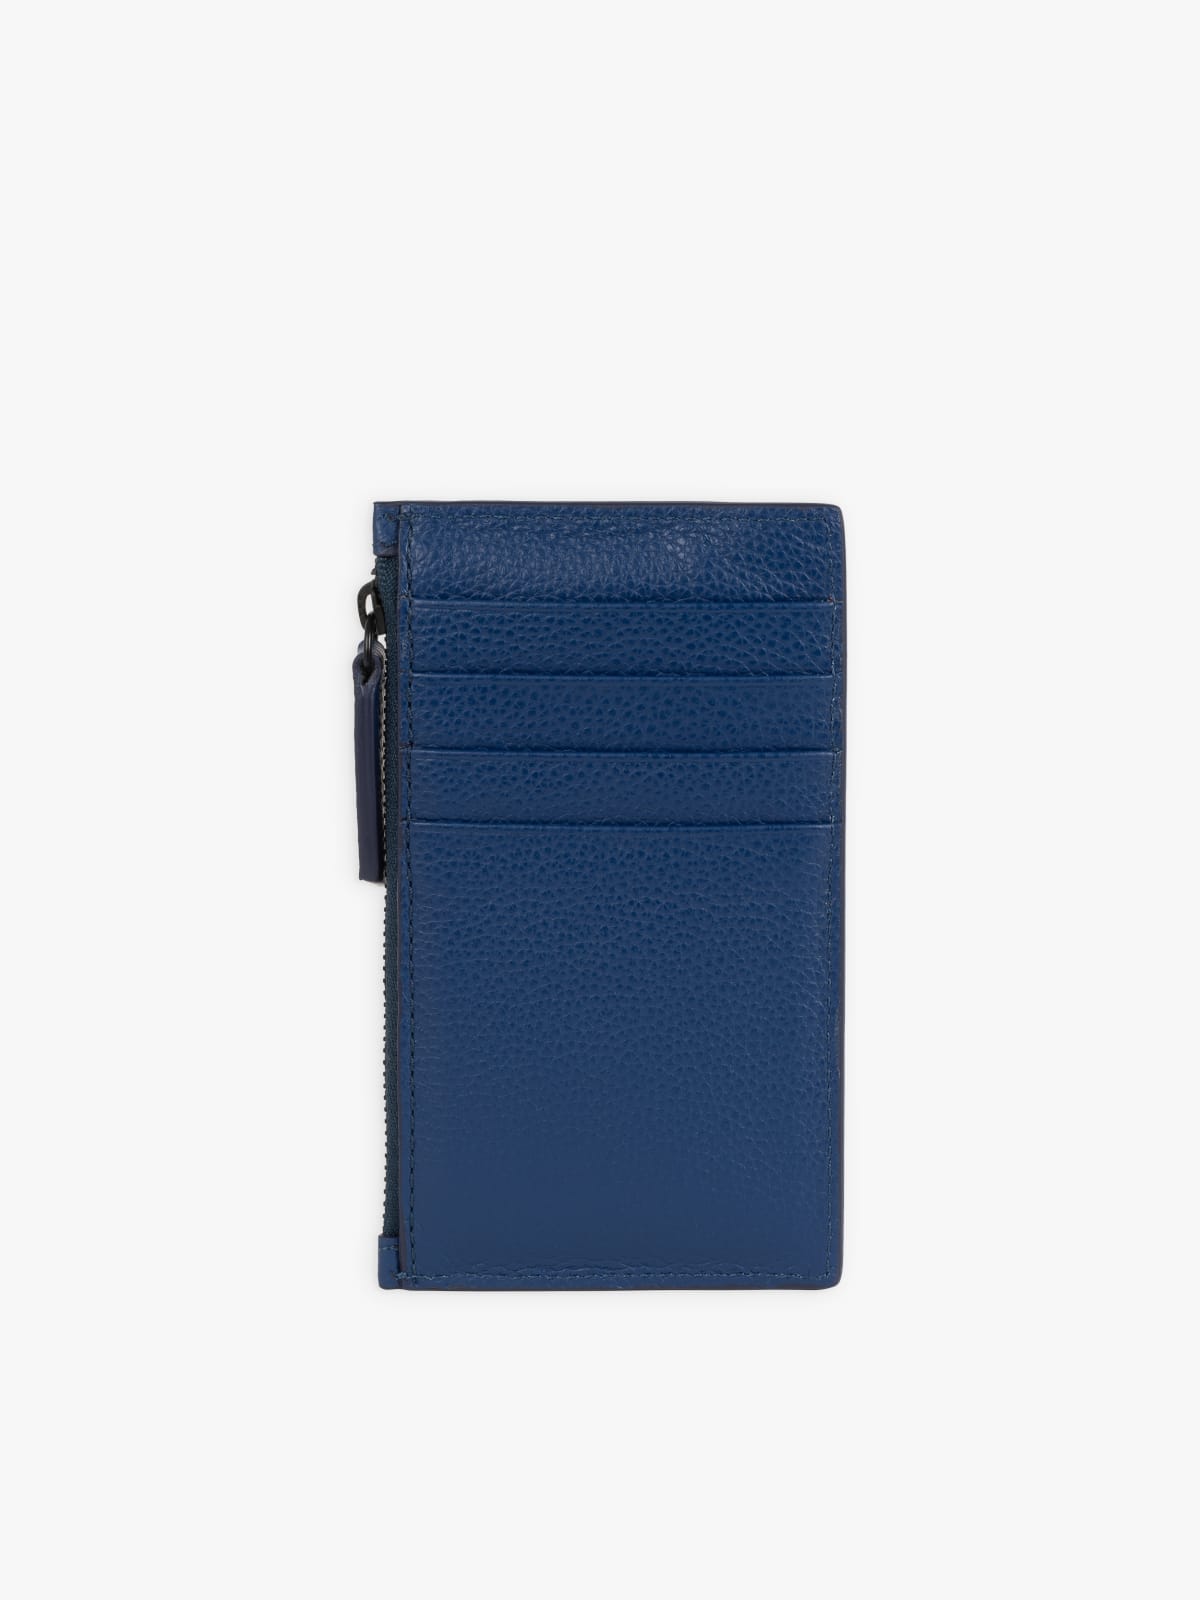 blue zipped leather card case